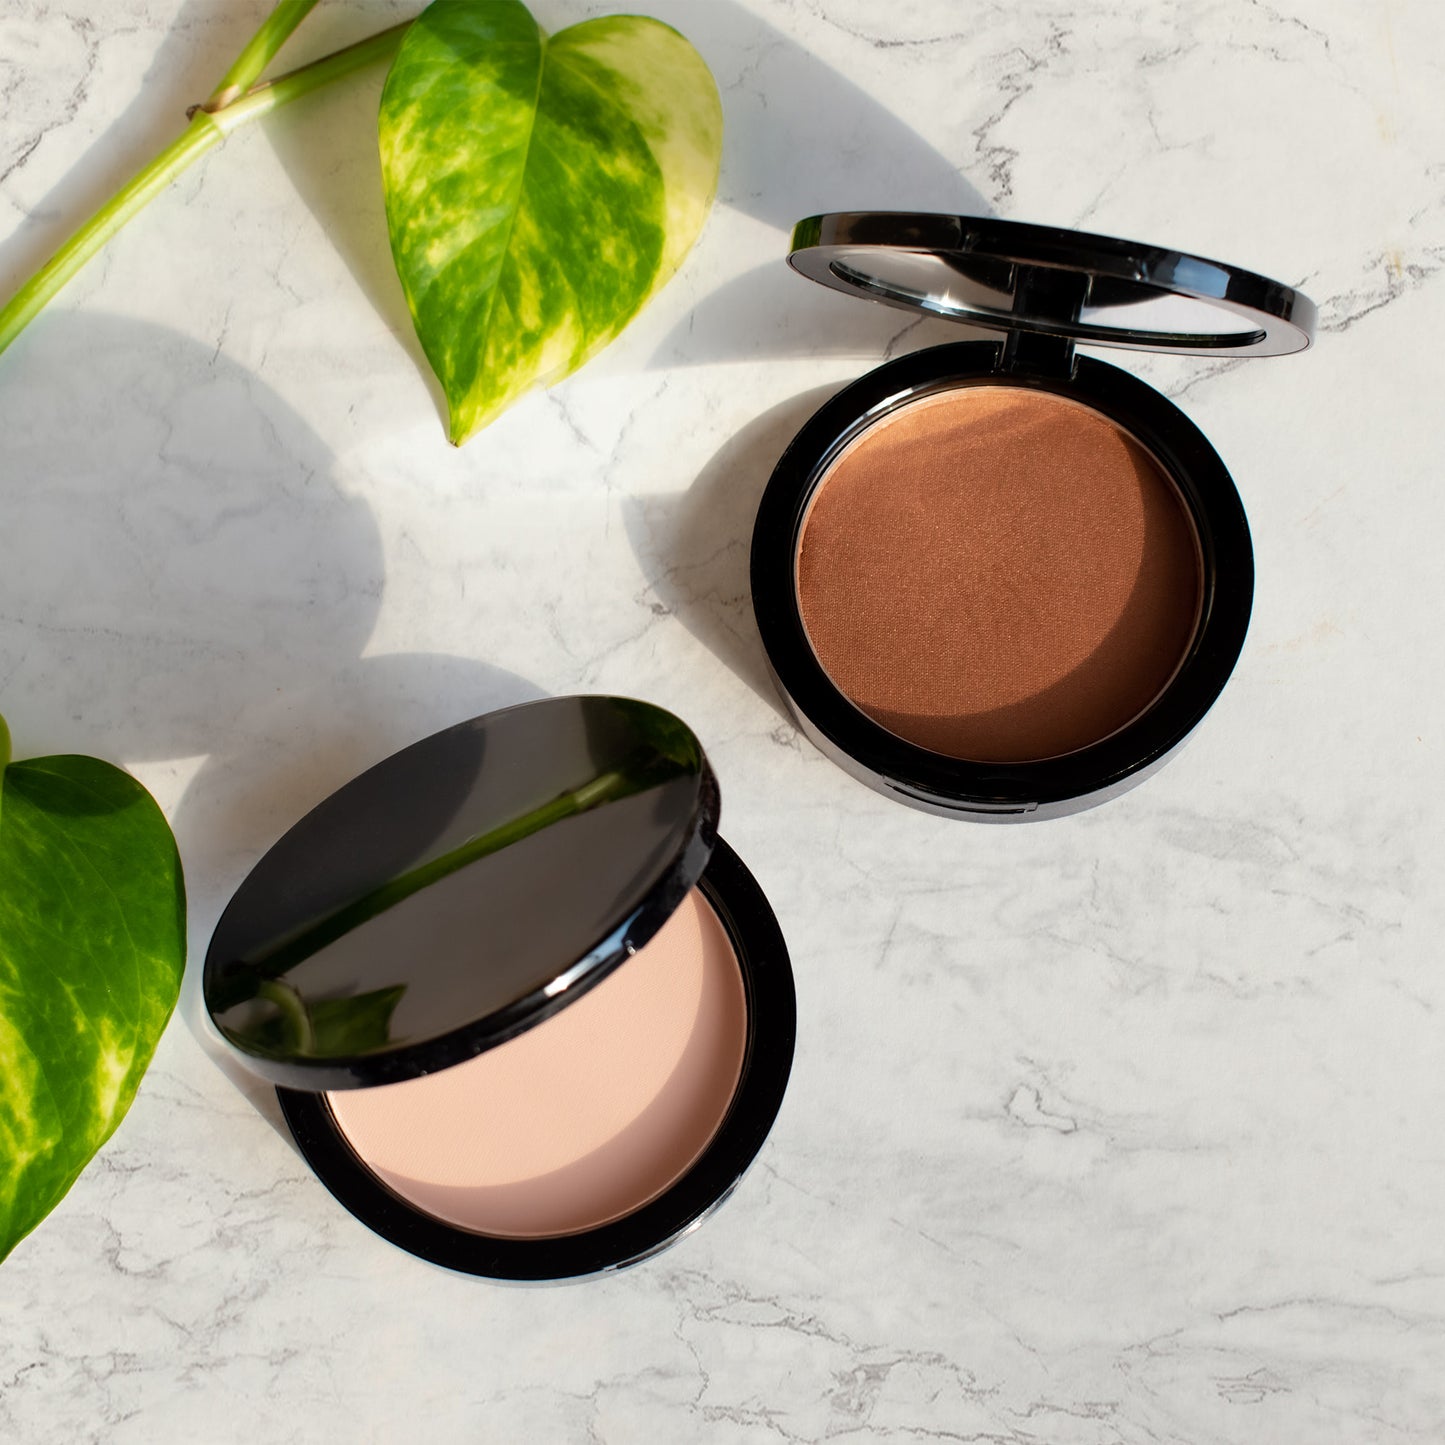 Cruisin Organics Mesa Dual-Blend Powder Foundation: transform your skin with 13 shades for light to full coverage, wet or dry. That work in any climate, whether you're in sunny Florida or on-the-go. Get ready to glow effortlessly with our compact design.